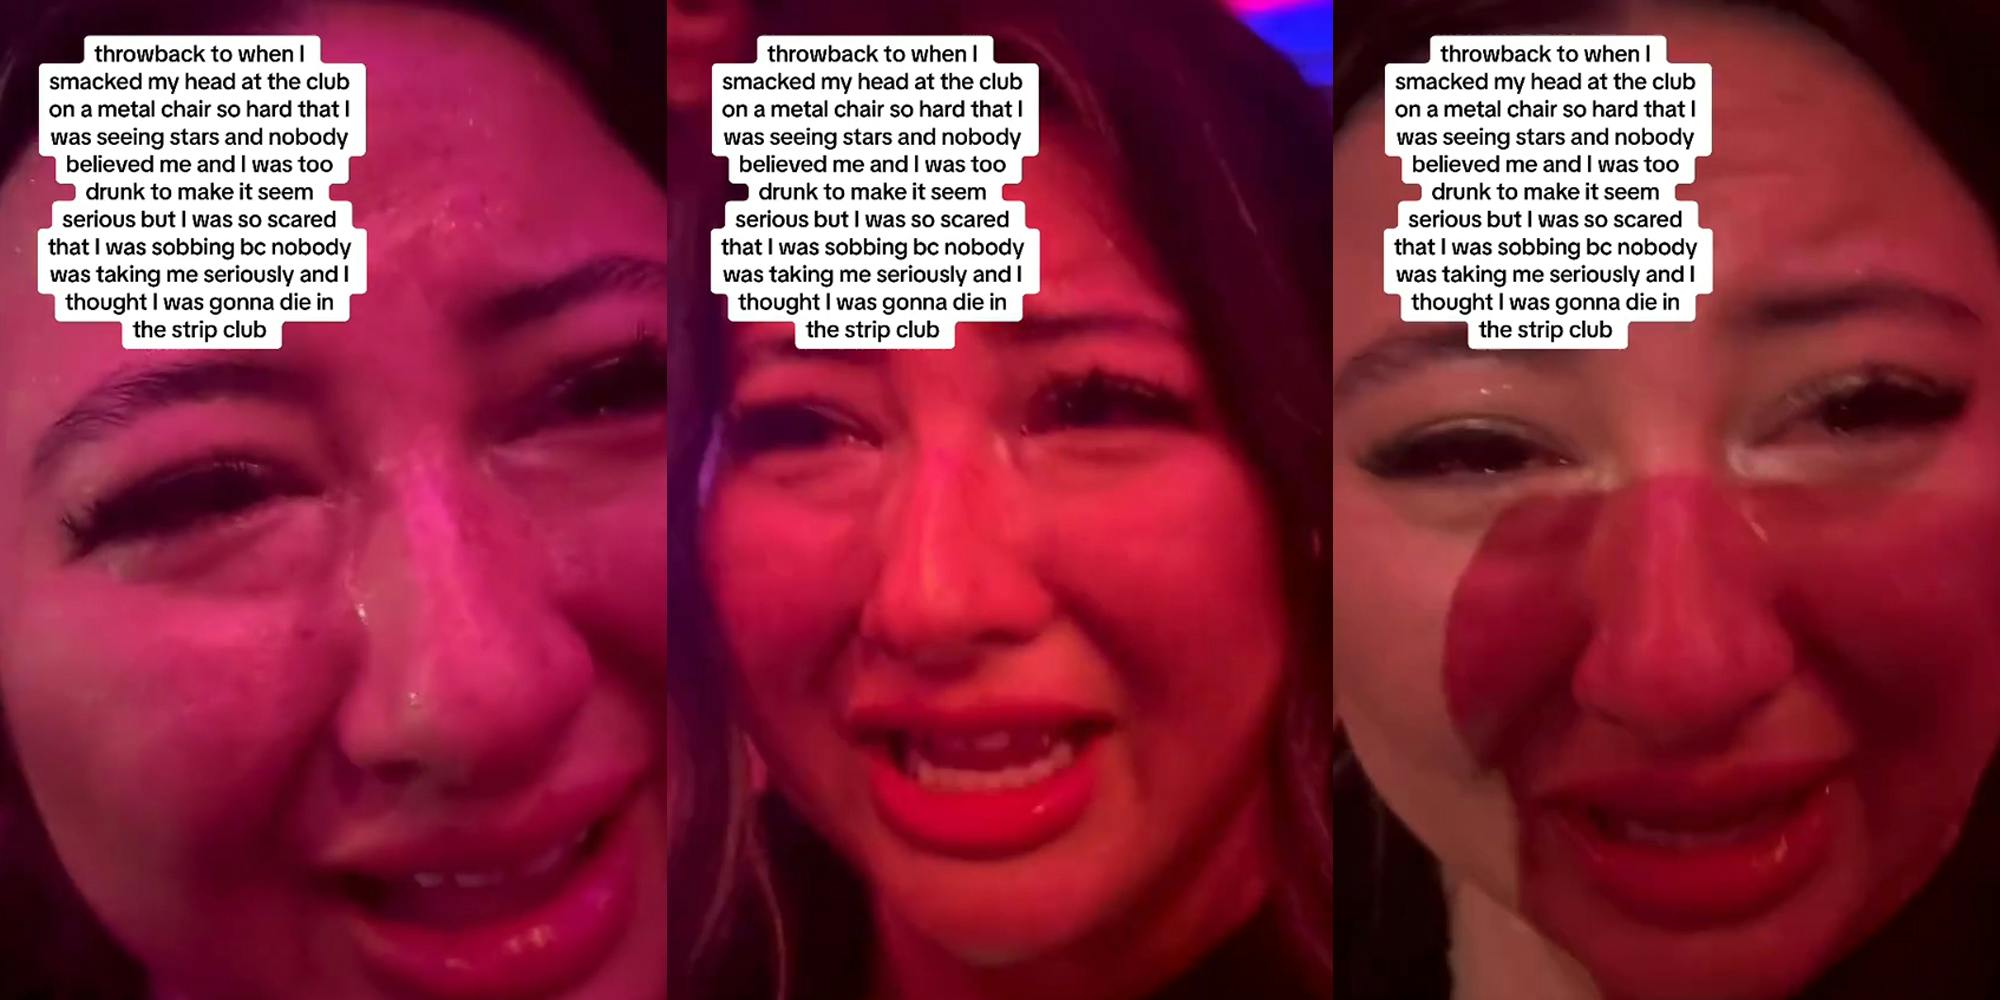 woman crying in club with caption "throwback to when I smacked my head at the club on a metal chair so hard that I could see stars and nobody believed me and I was too drunk to make it seem serious but I was so scared that I was sobbing bc nobody was taking me seriously and I thought I was gonna die in the strip club" (l) woman crying in club with caption "throwback to when I smacked my head at the club on a metal chair so hard that I could see stars and nobody believed me and I was too drunk to make it seem serious but I was so scared that I was sobbing bc nobody was taking me seriously and I thought I was gonna die in the strip club" (c) woman crying in club with caption "throwback to when I smacked my head at the club on a metal chair so hard that I could see stars and nobody believed me and I was too drunk to make it seem serious but I was so scared that I was sobbing bc nobody was taking me seriously and I thought I was gonna die in the strip club" (r)